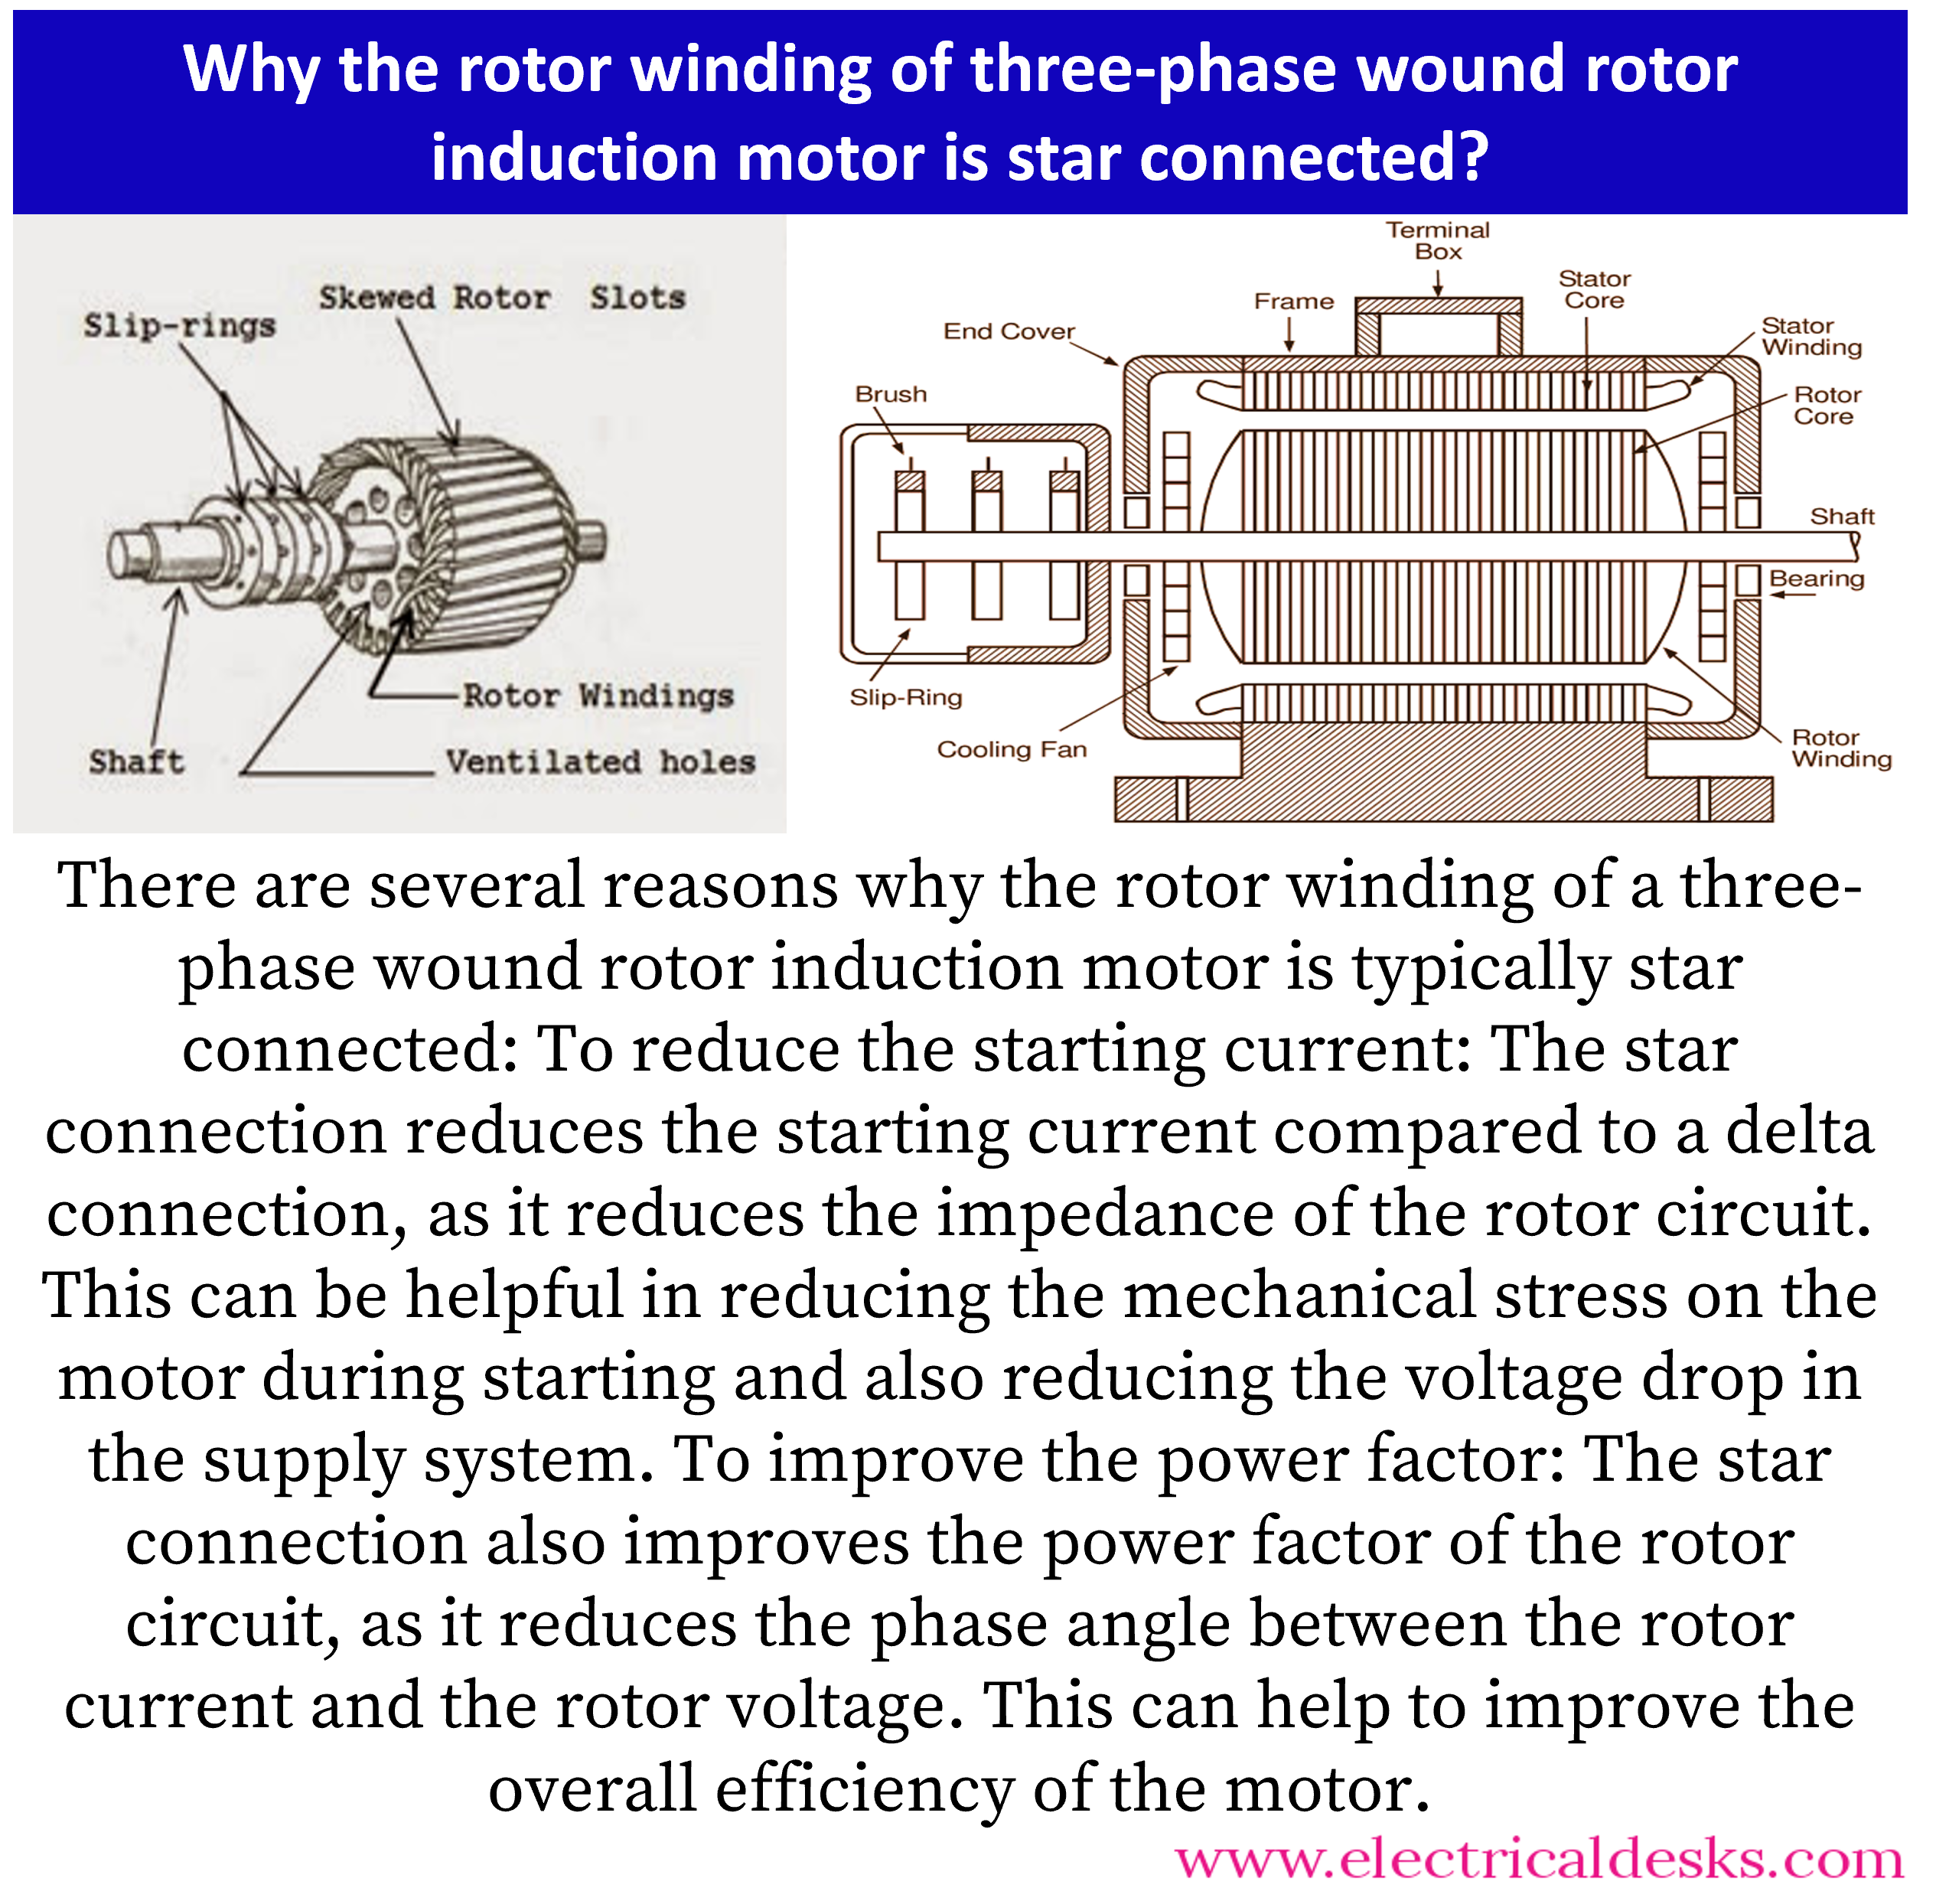 Large-Scale High-Voltage Motor, Induction Motor